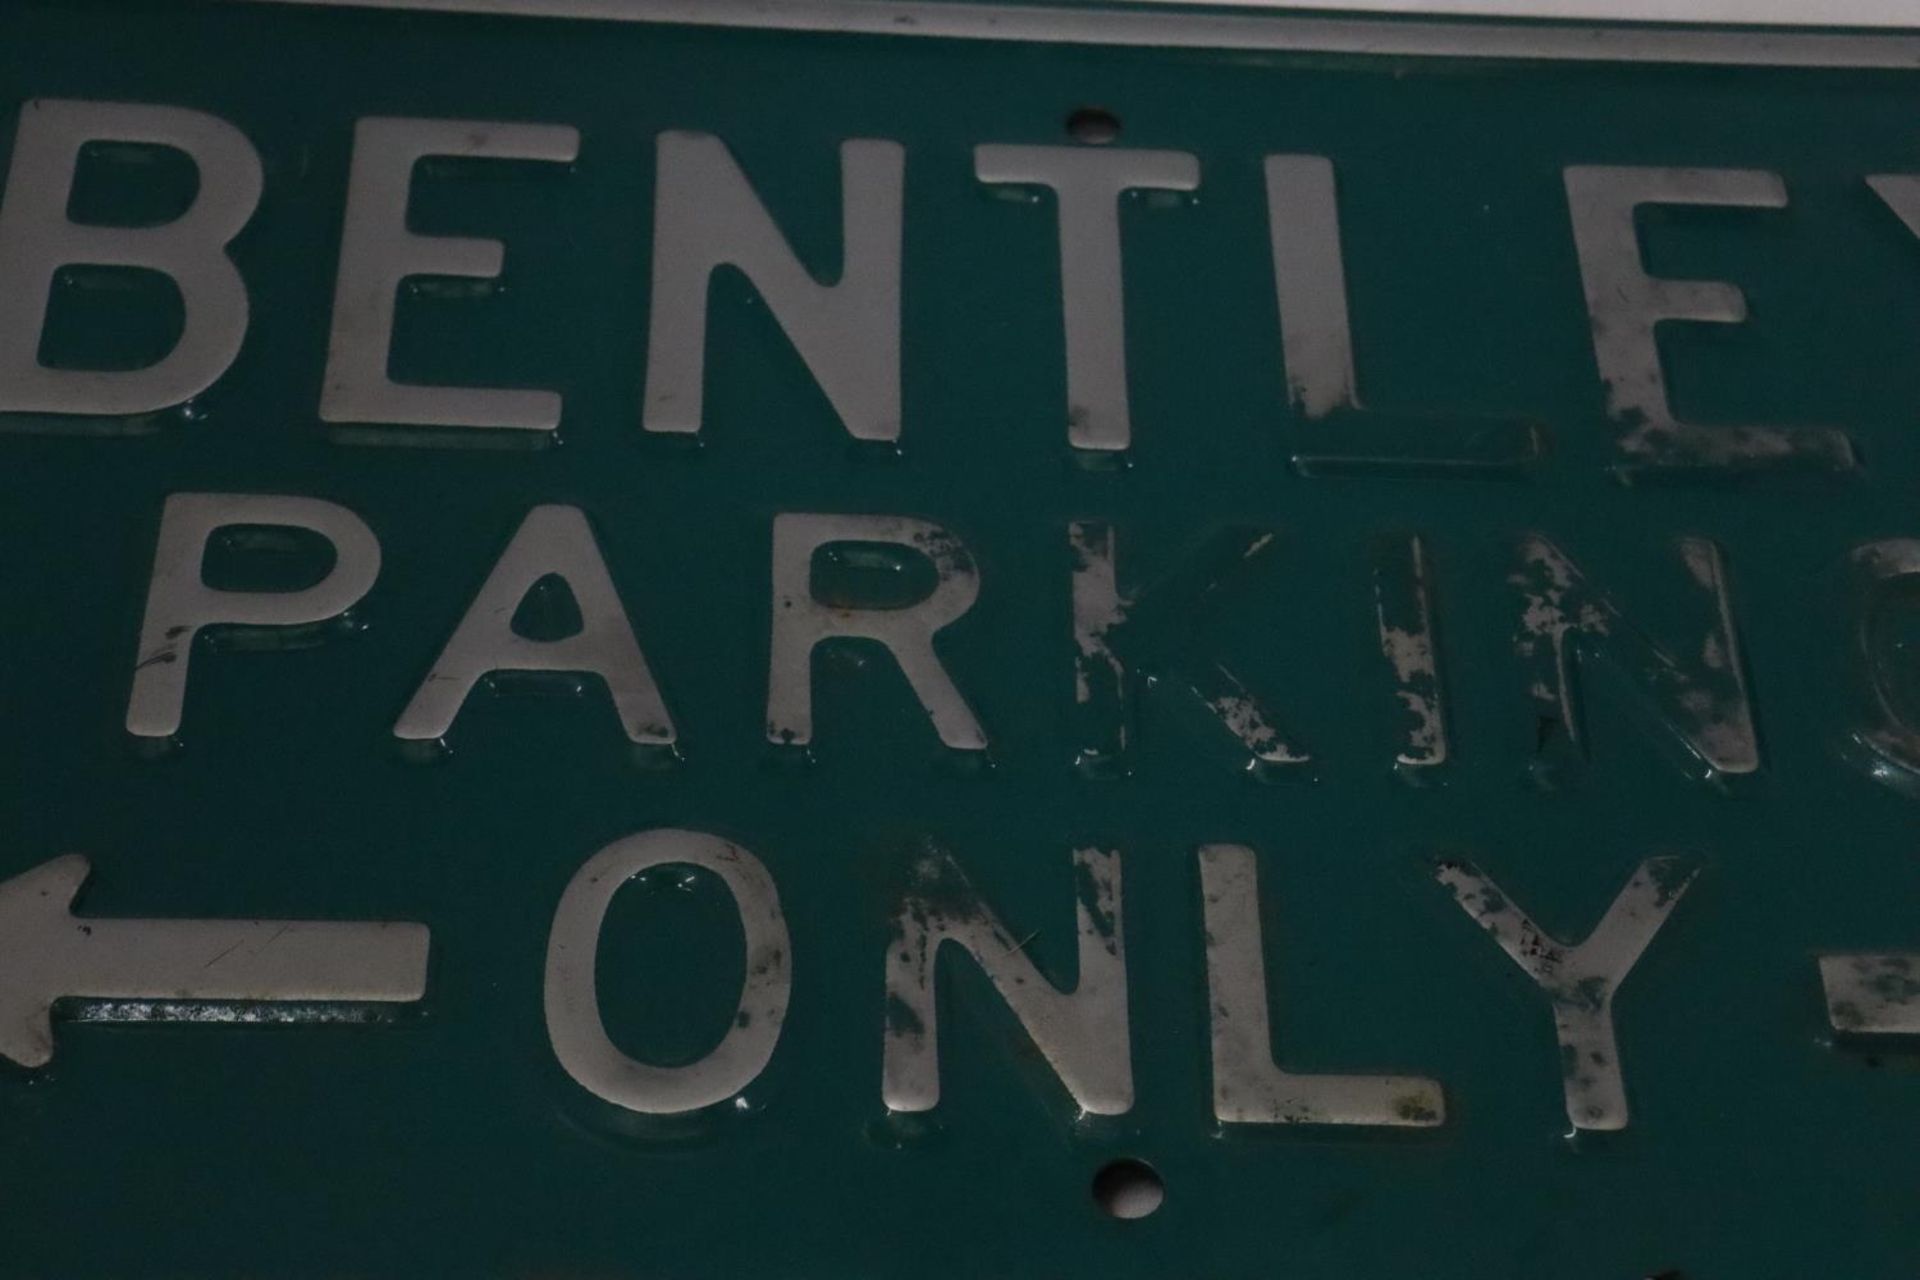 A METAL 'BENTLEY PARKING ONLY' SIGN, 45CM X 30CM - Image 2 of 2